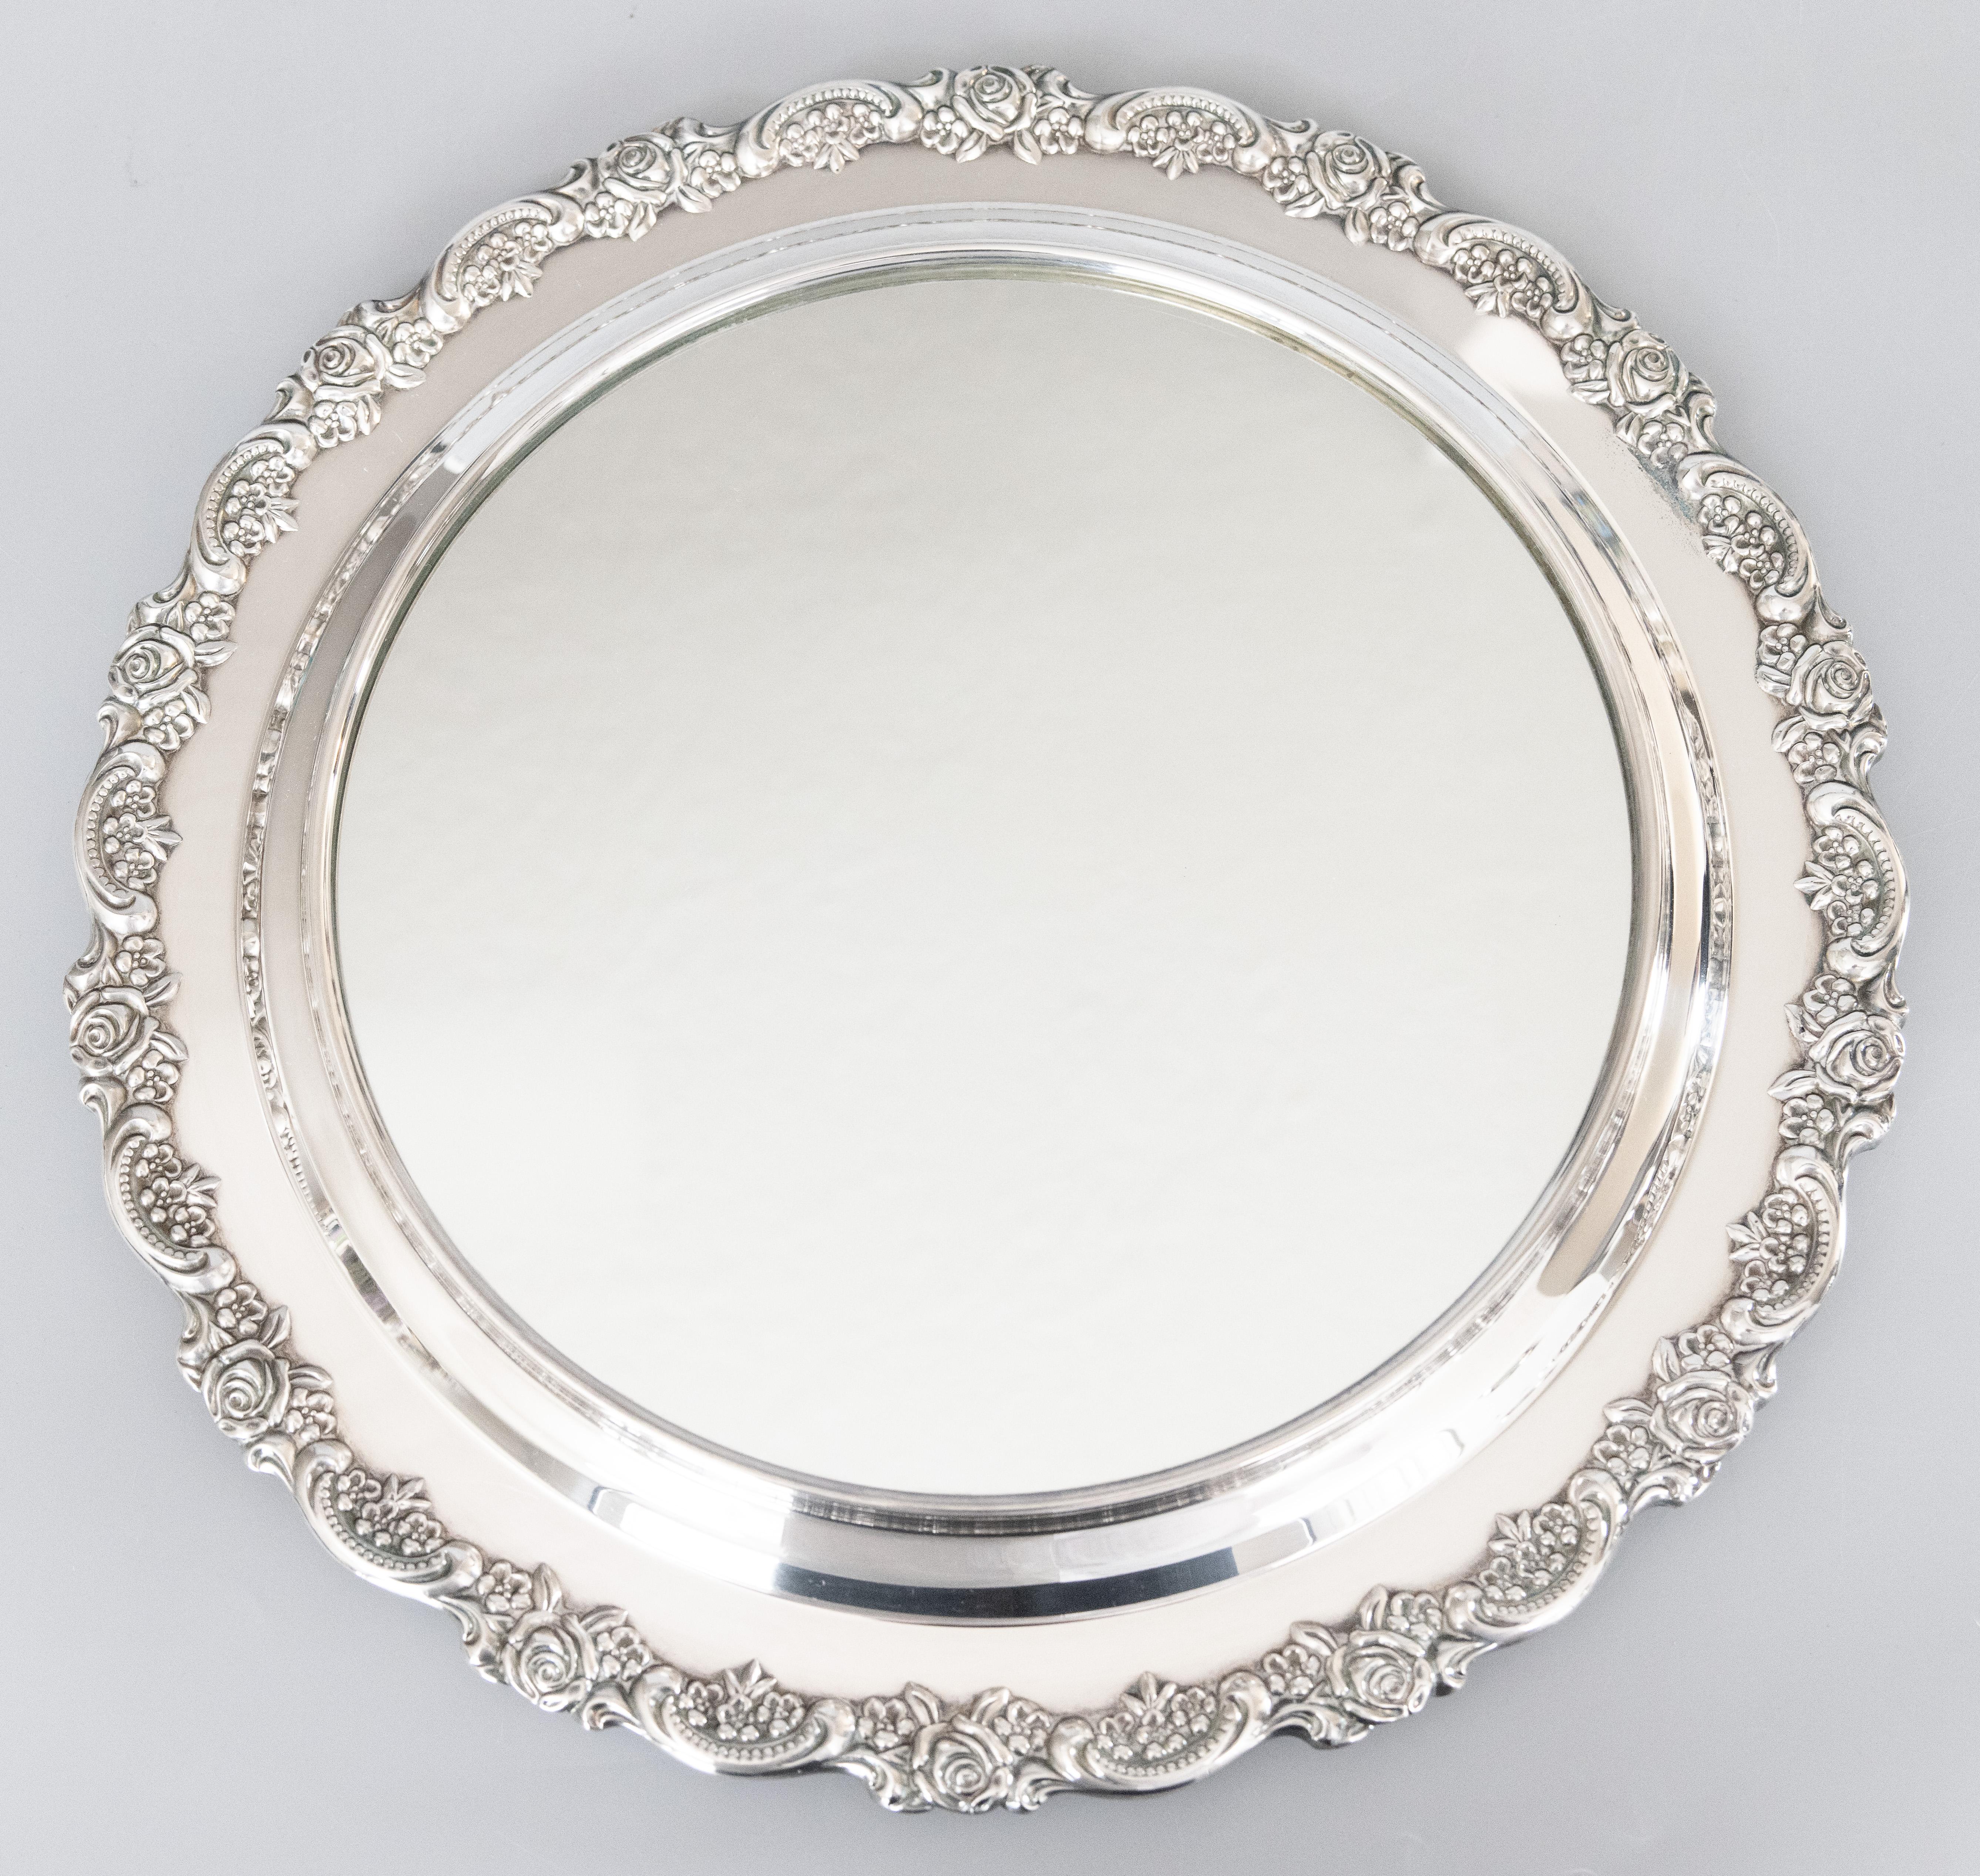 A superb vintage silverplate round mirrored table plateau or footed tray with an ornate floral roses border and charming ball feet, circa 1950. No maker's mark. It would look gorgeous displayed on a buffet with wine glasses, used to elevate a table